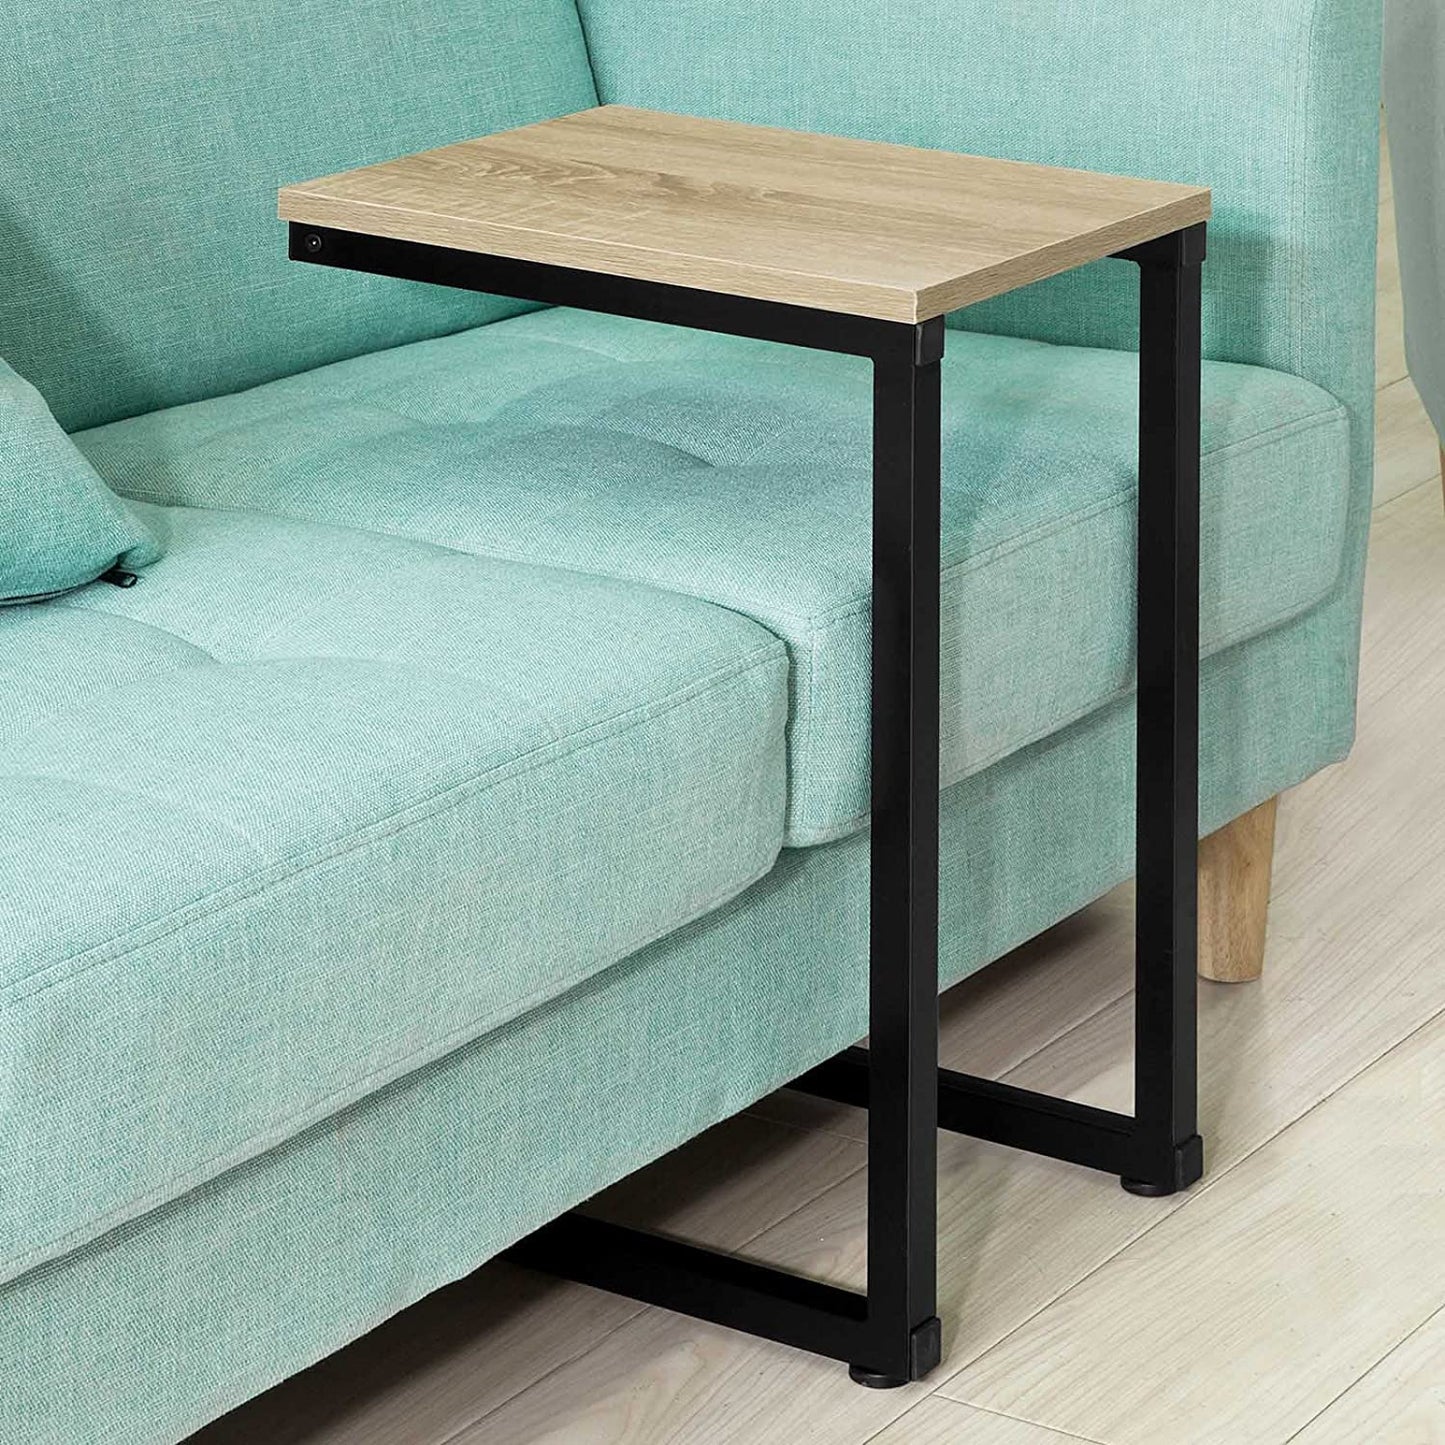 Sofa Side Table for Coffee time - image3